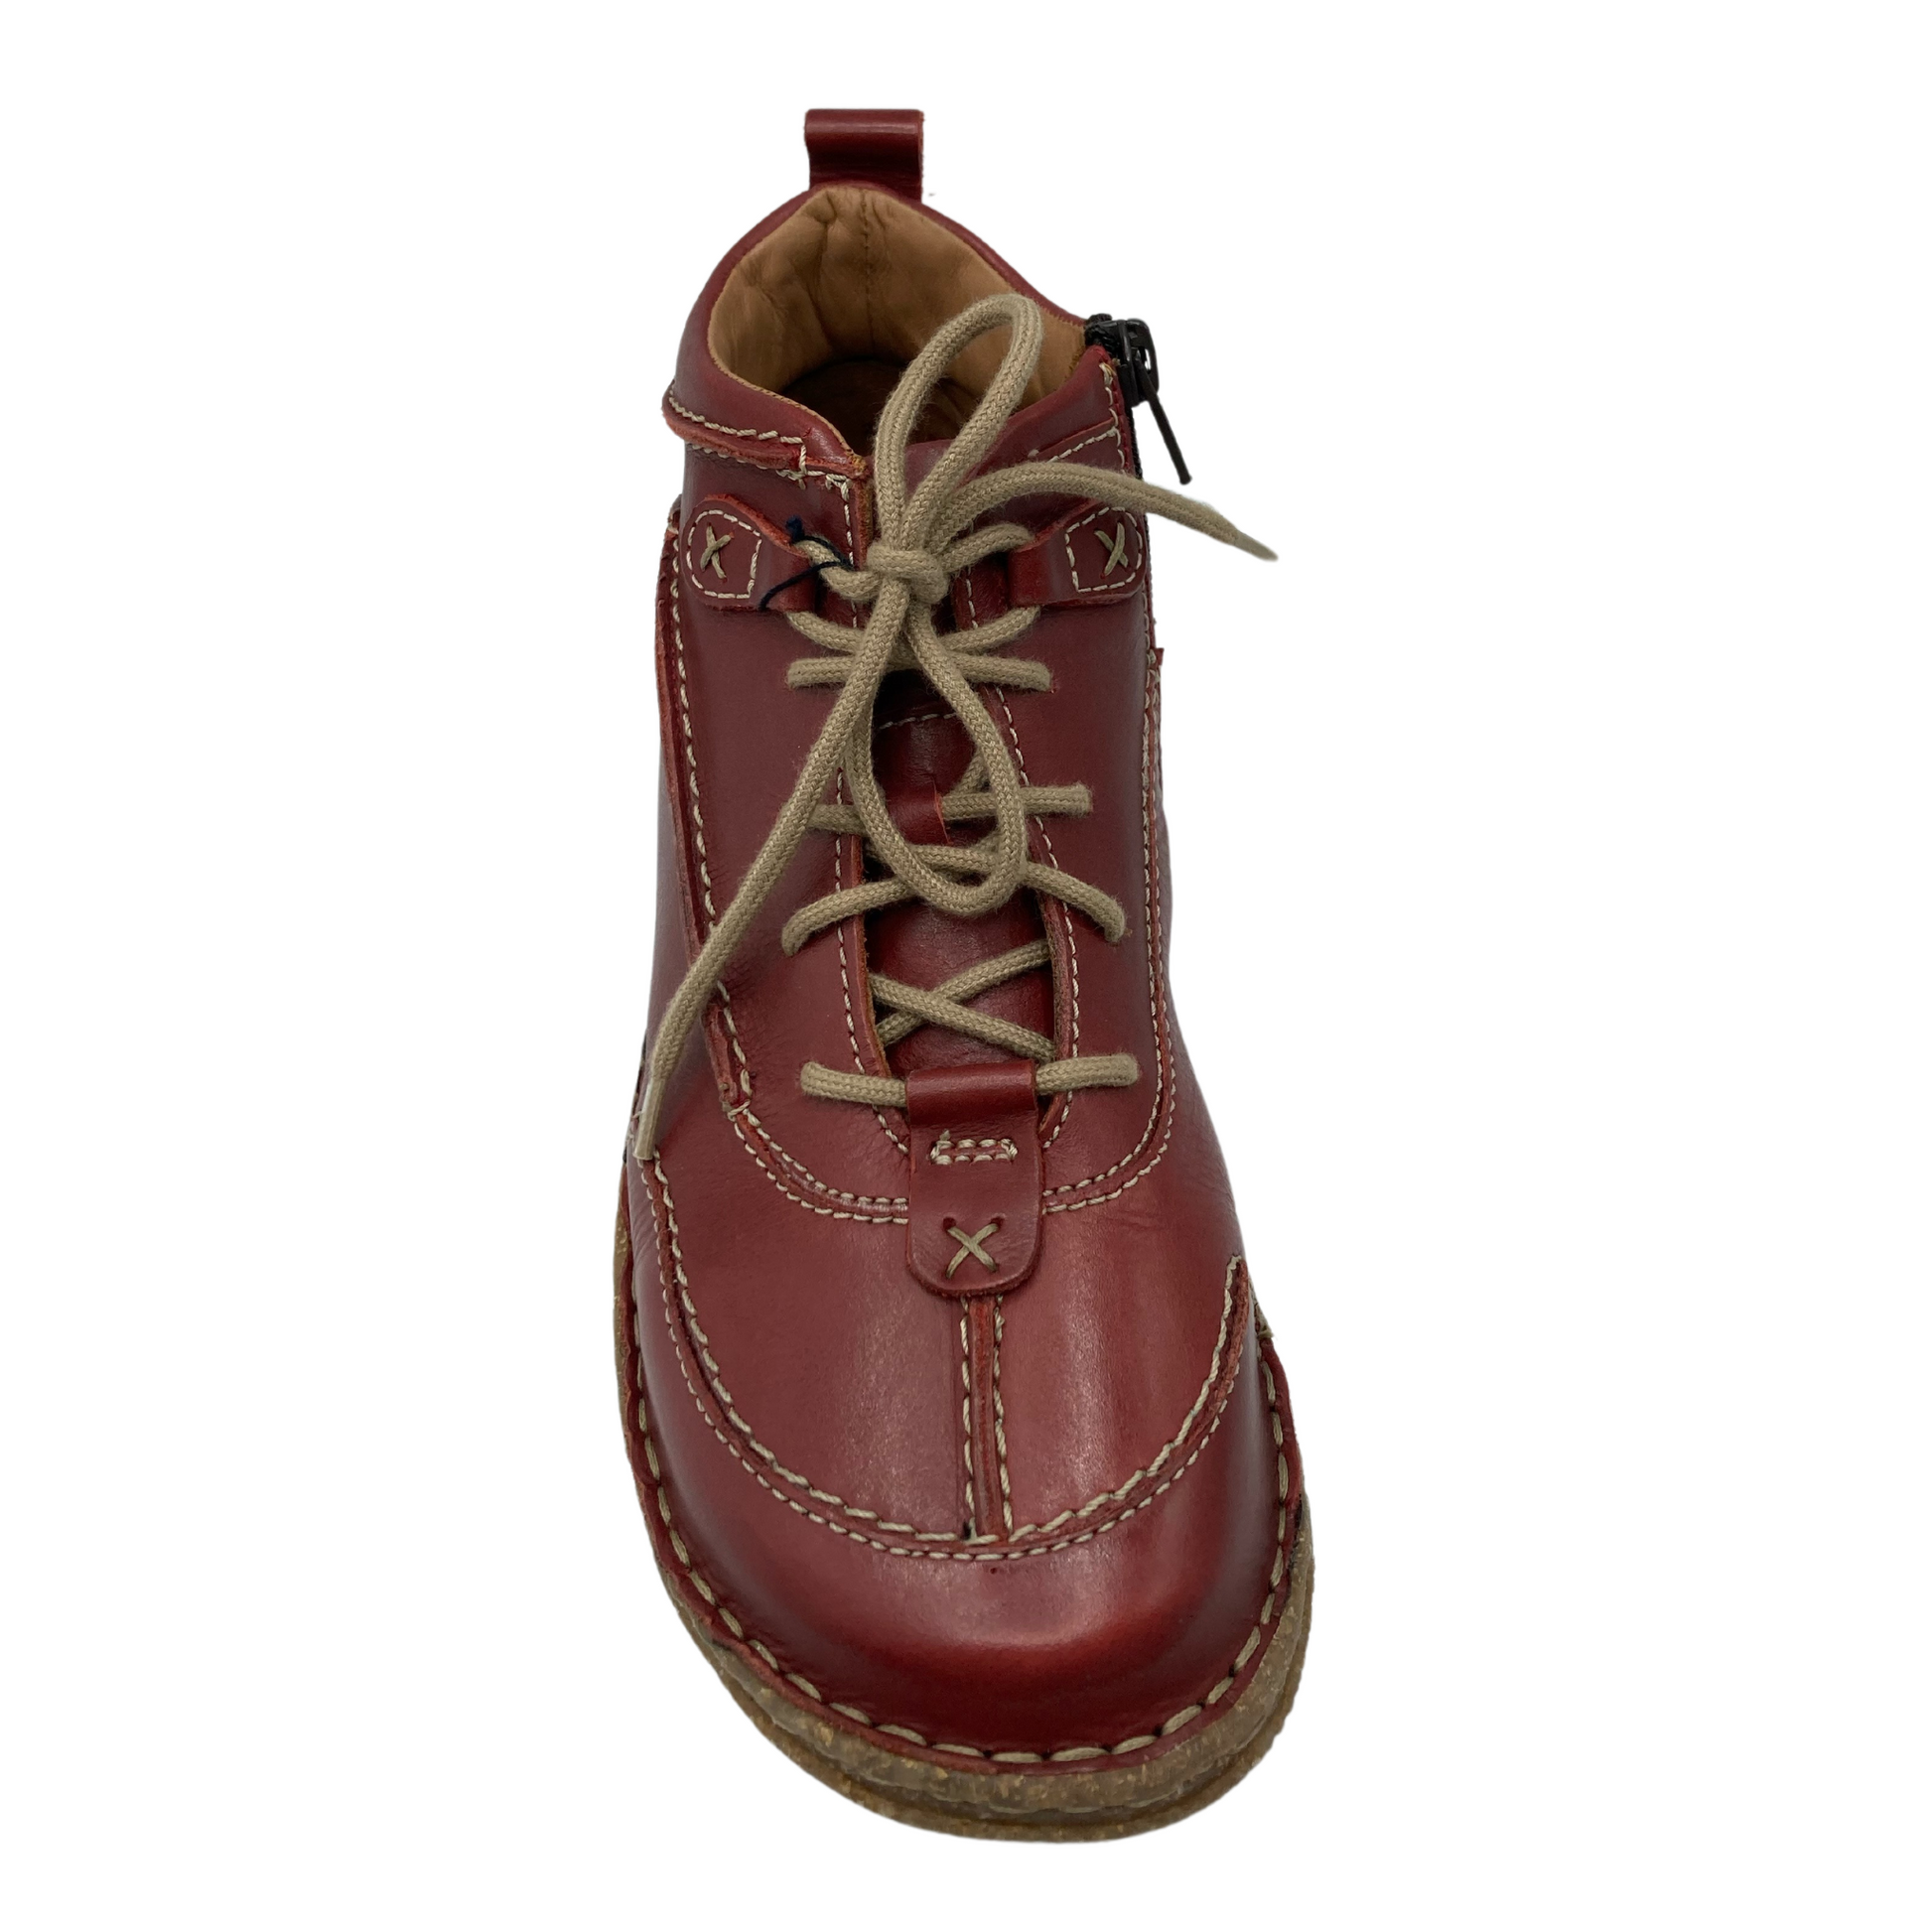 Top view of red leather shoe with tan laces